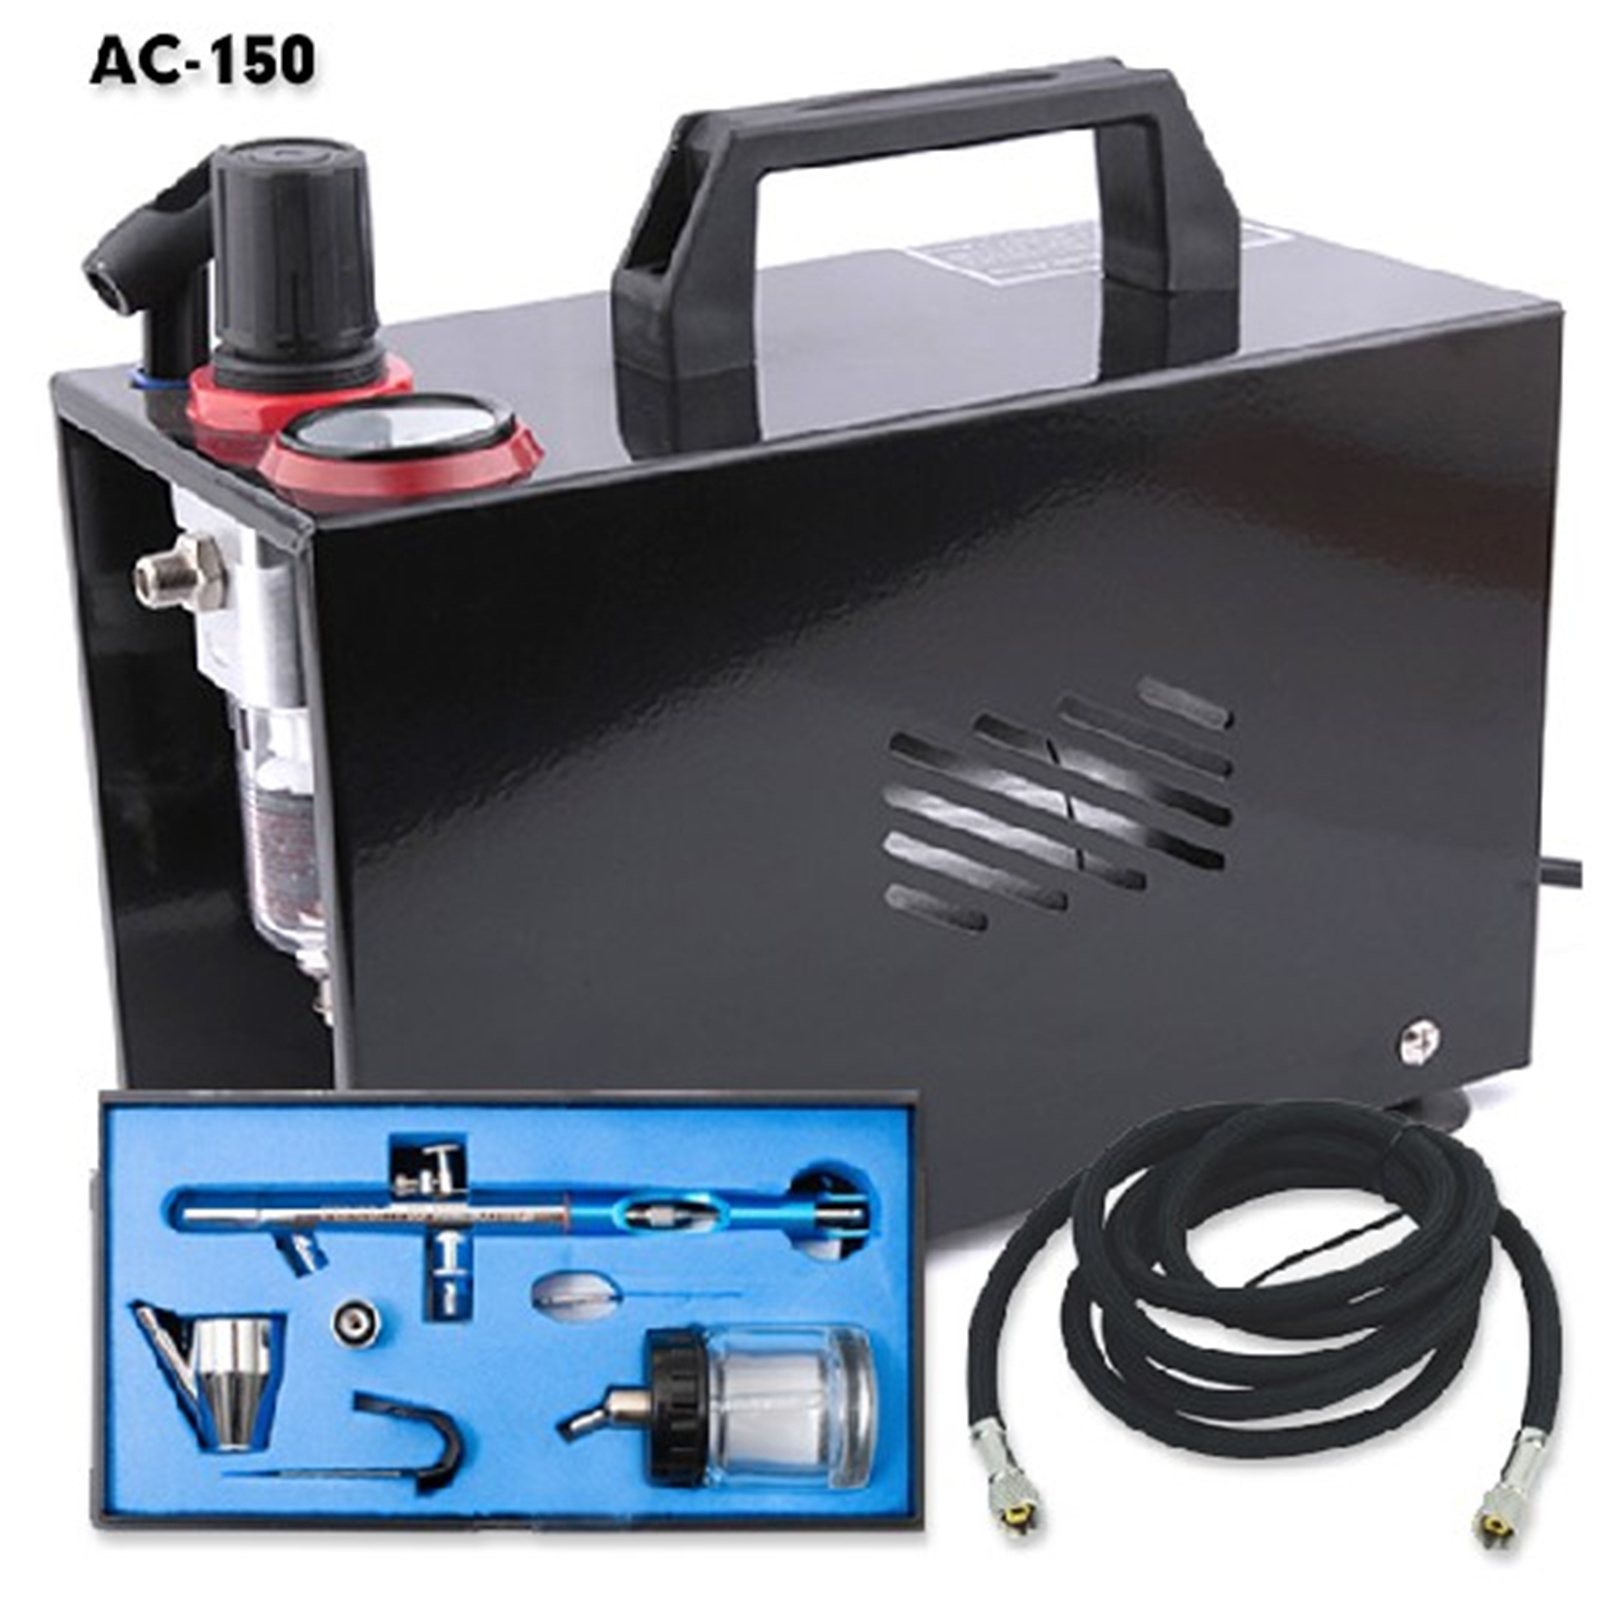 Buy the Fengda Encased Mini Compressor with Airbrush, Kit, & Tools ( TBL -  AC-150 ) online - PBTech.com